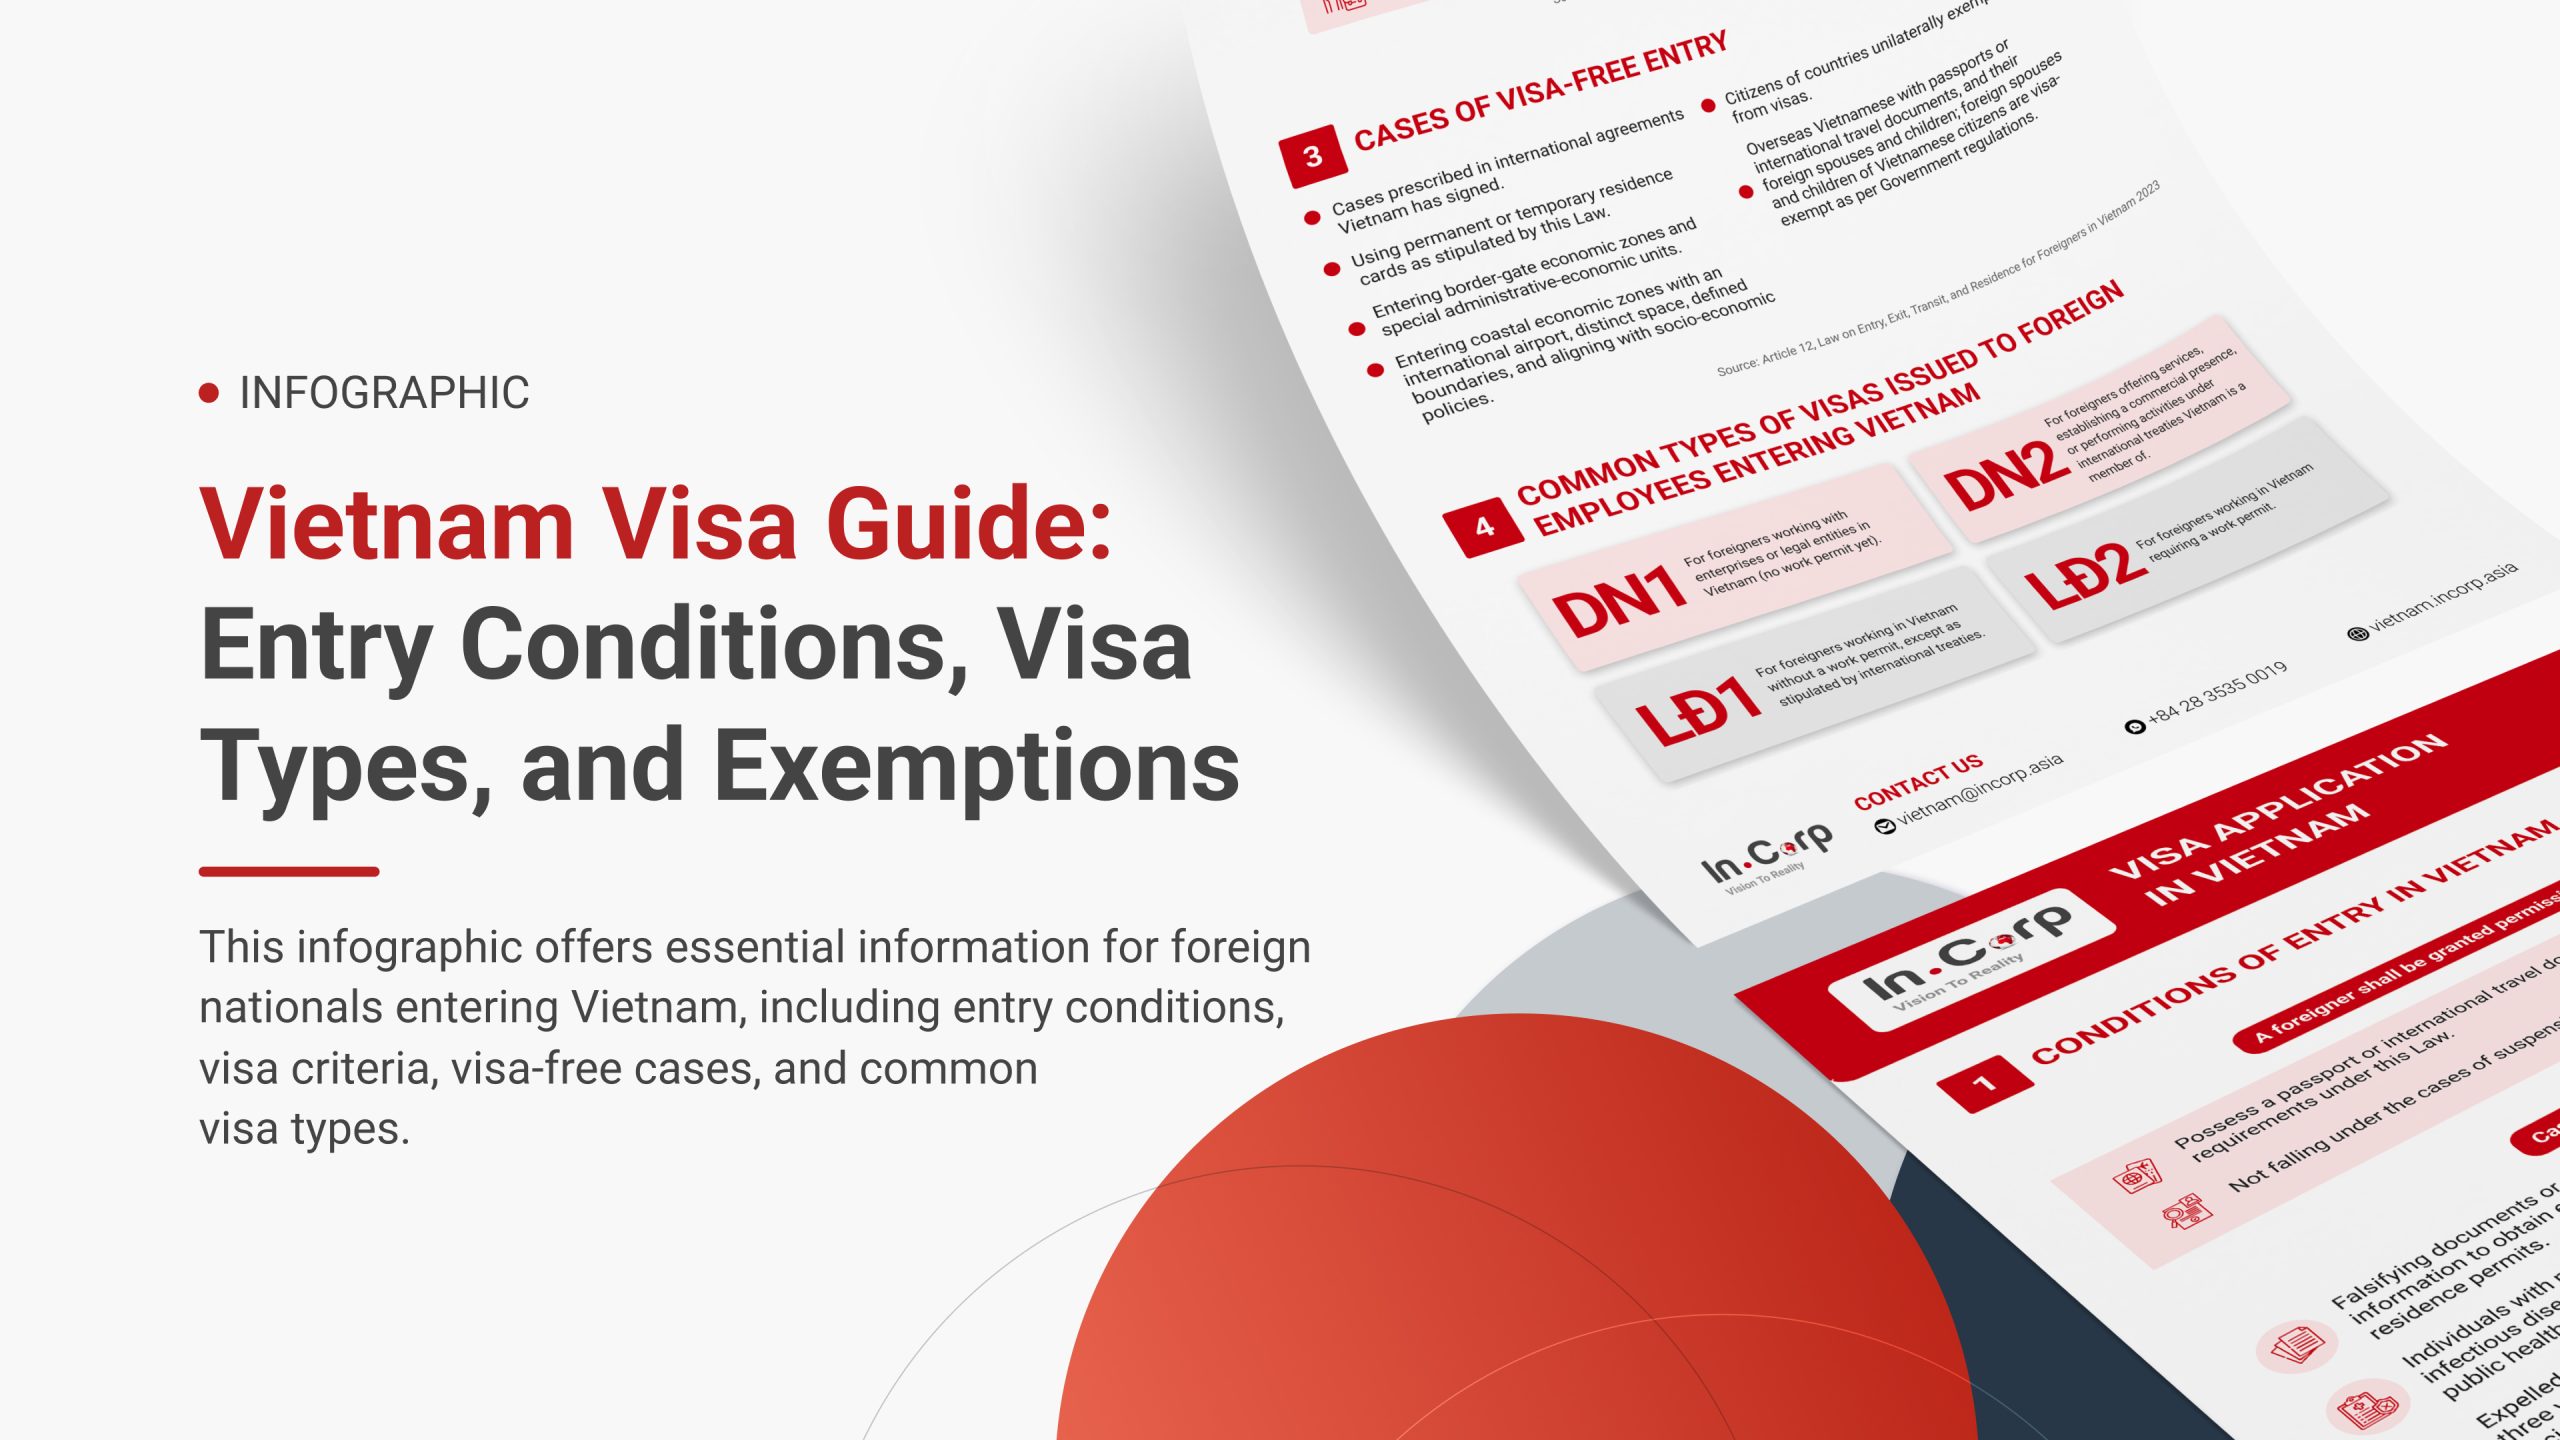 Vietnam Visa Applications: Entry Conditions, Visa Types, and Exemptions